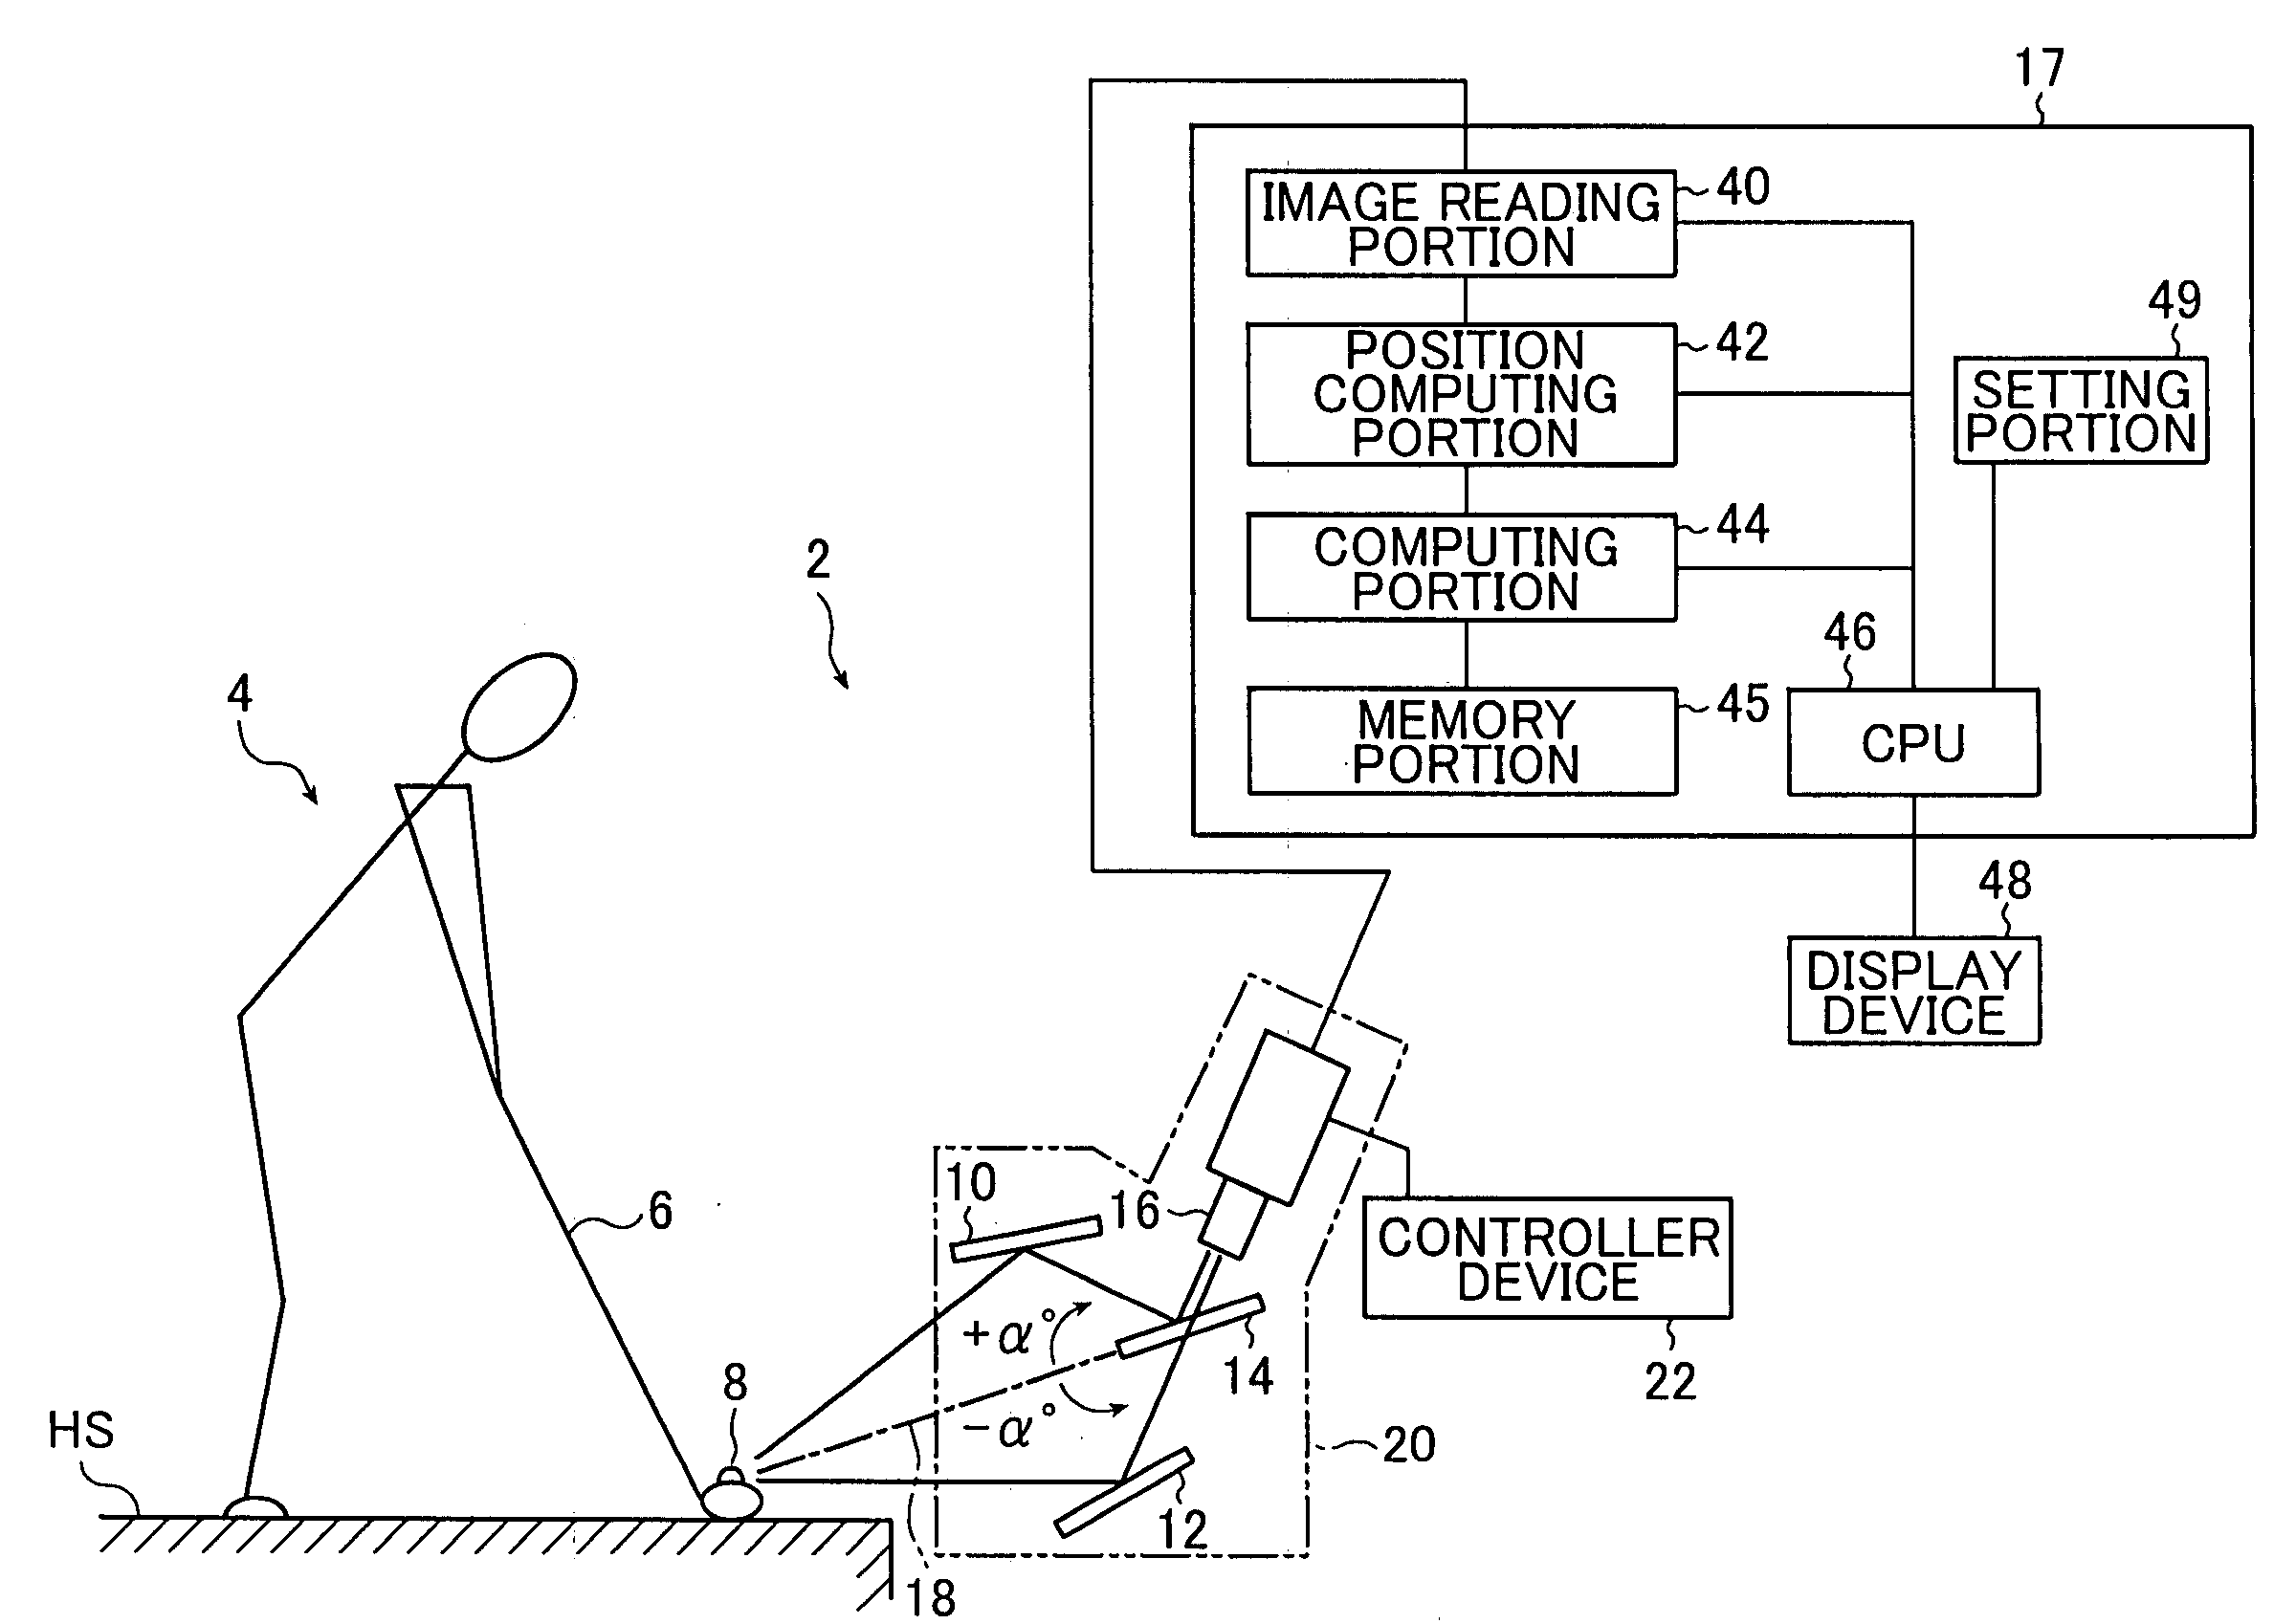 Apparatus and method of measuring the flying behavior of a flying body